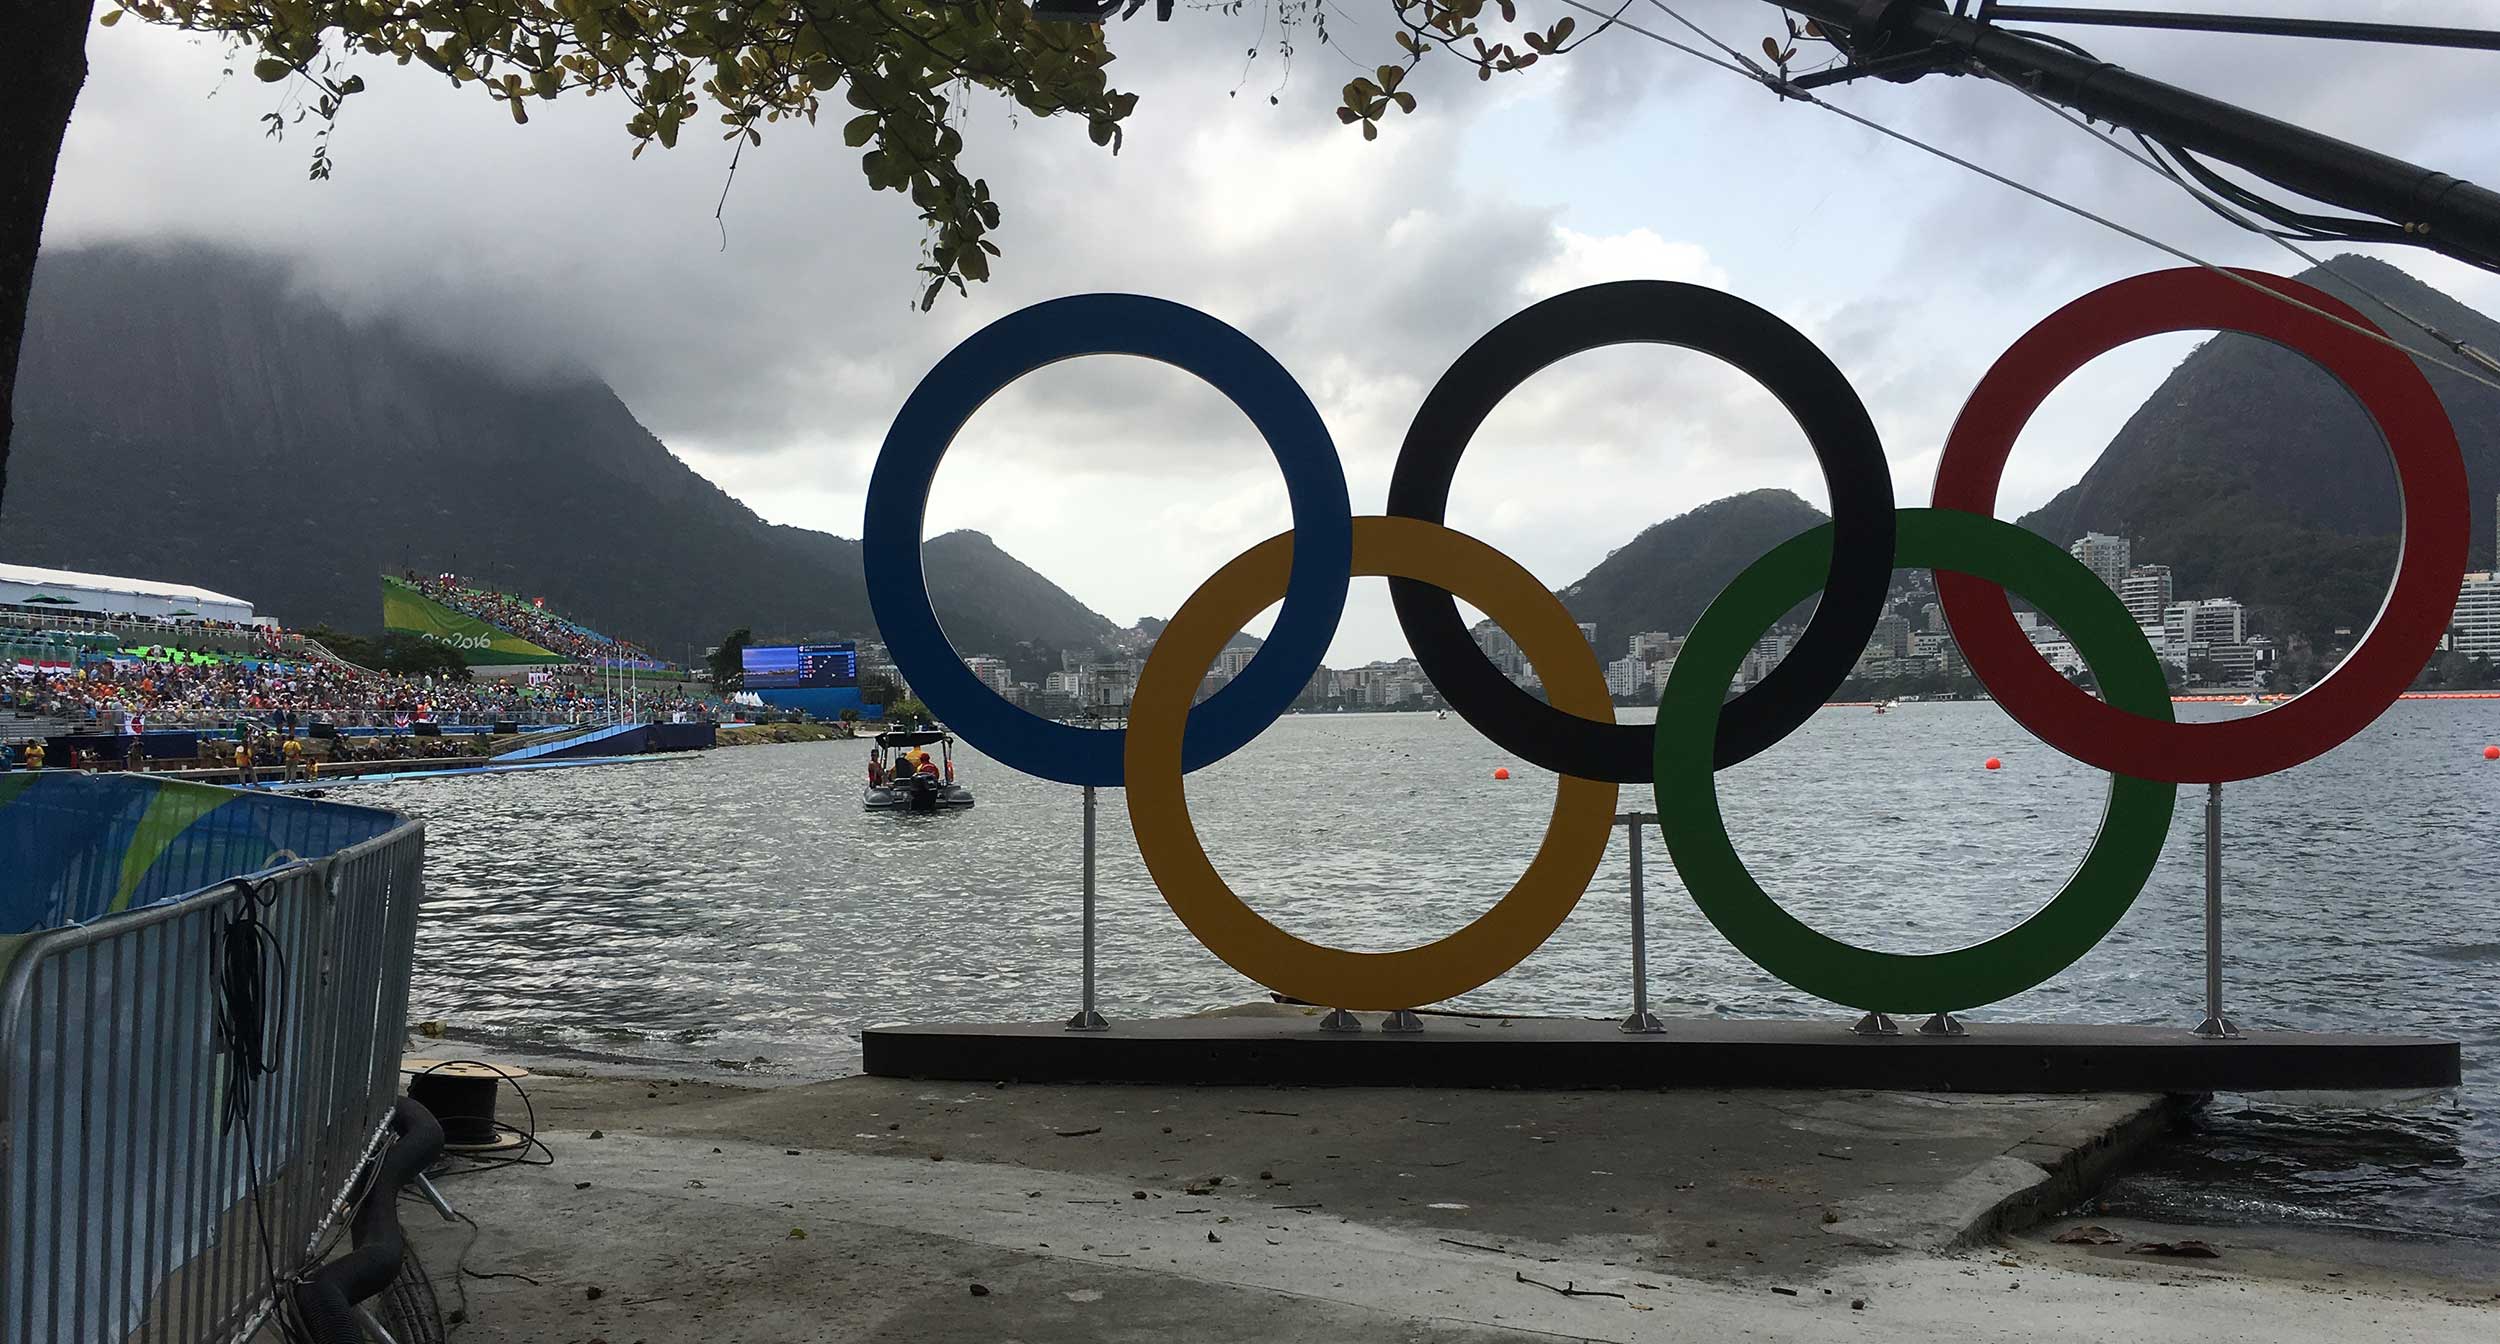 The Olympic rings next to the lake for rowing in Rio de Janeiro